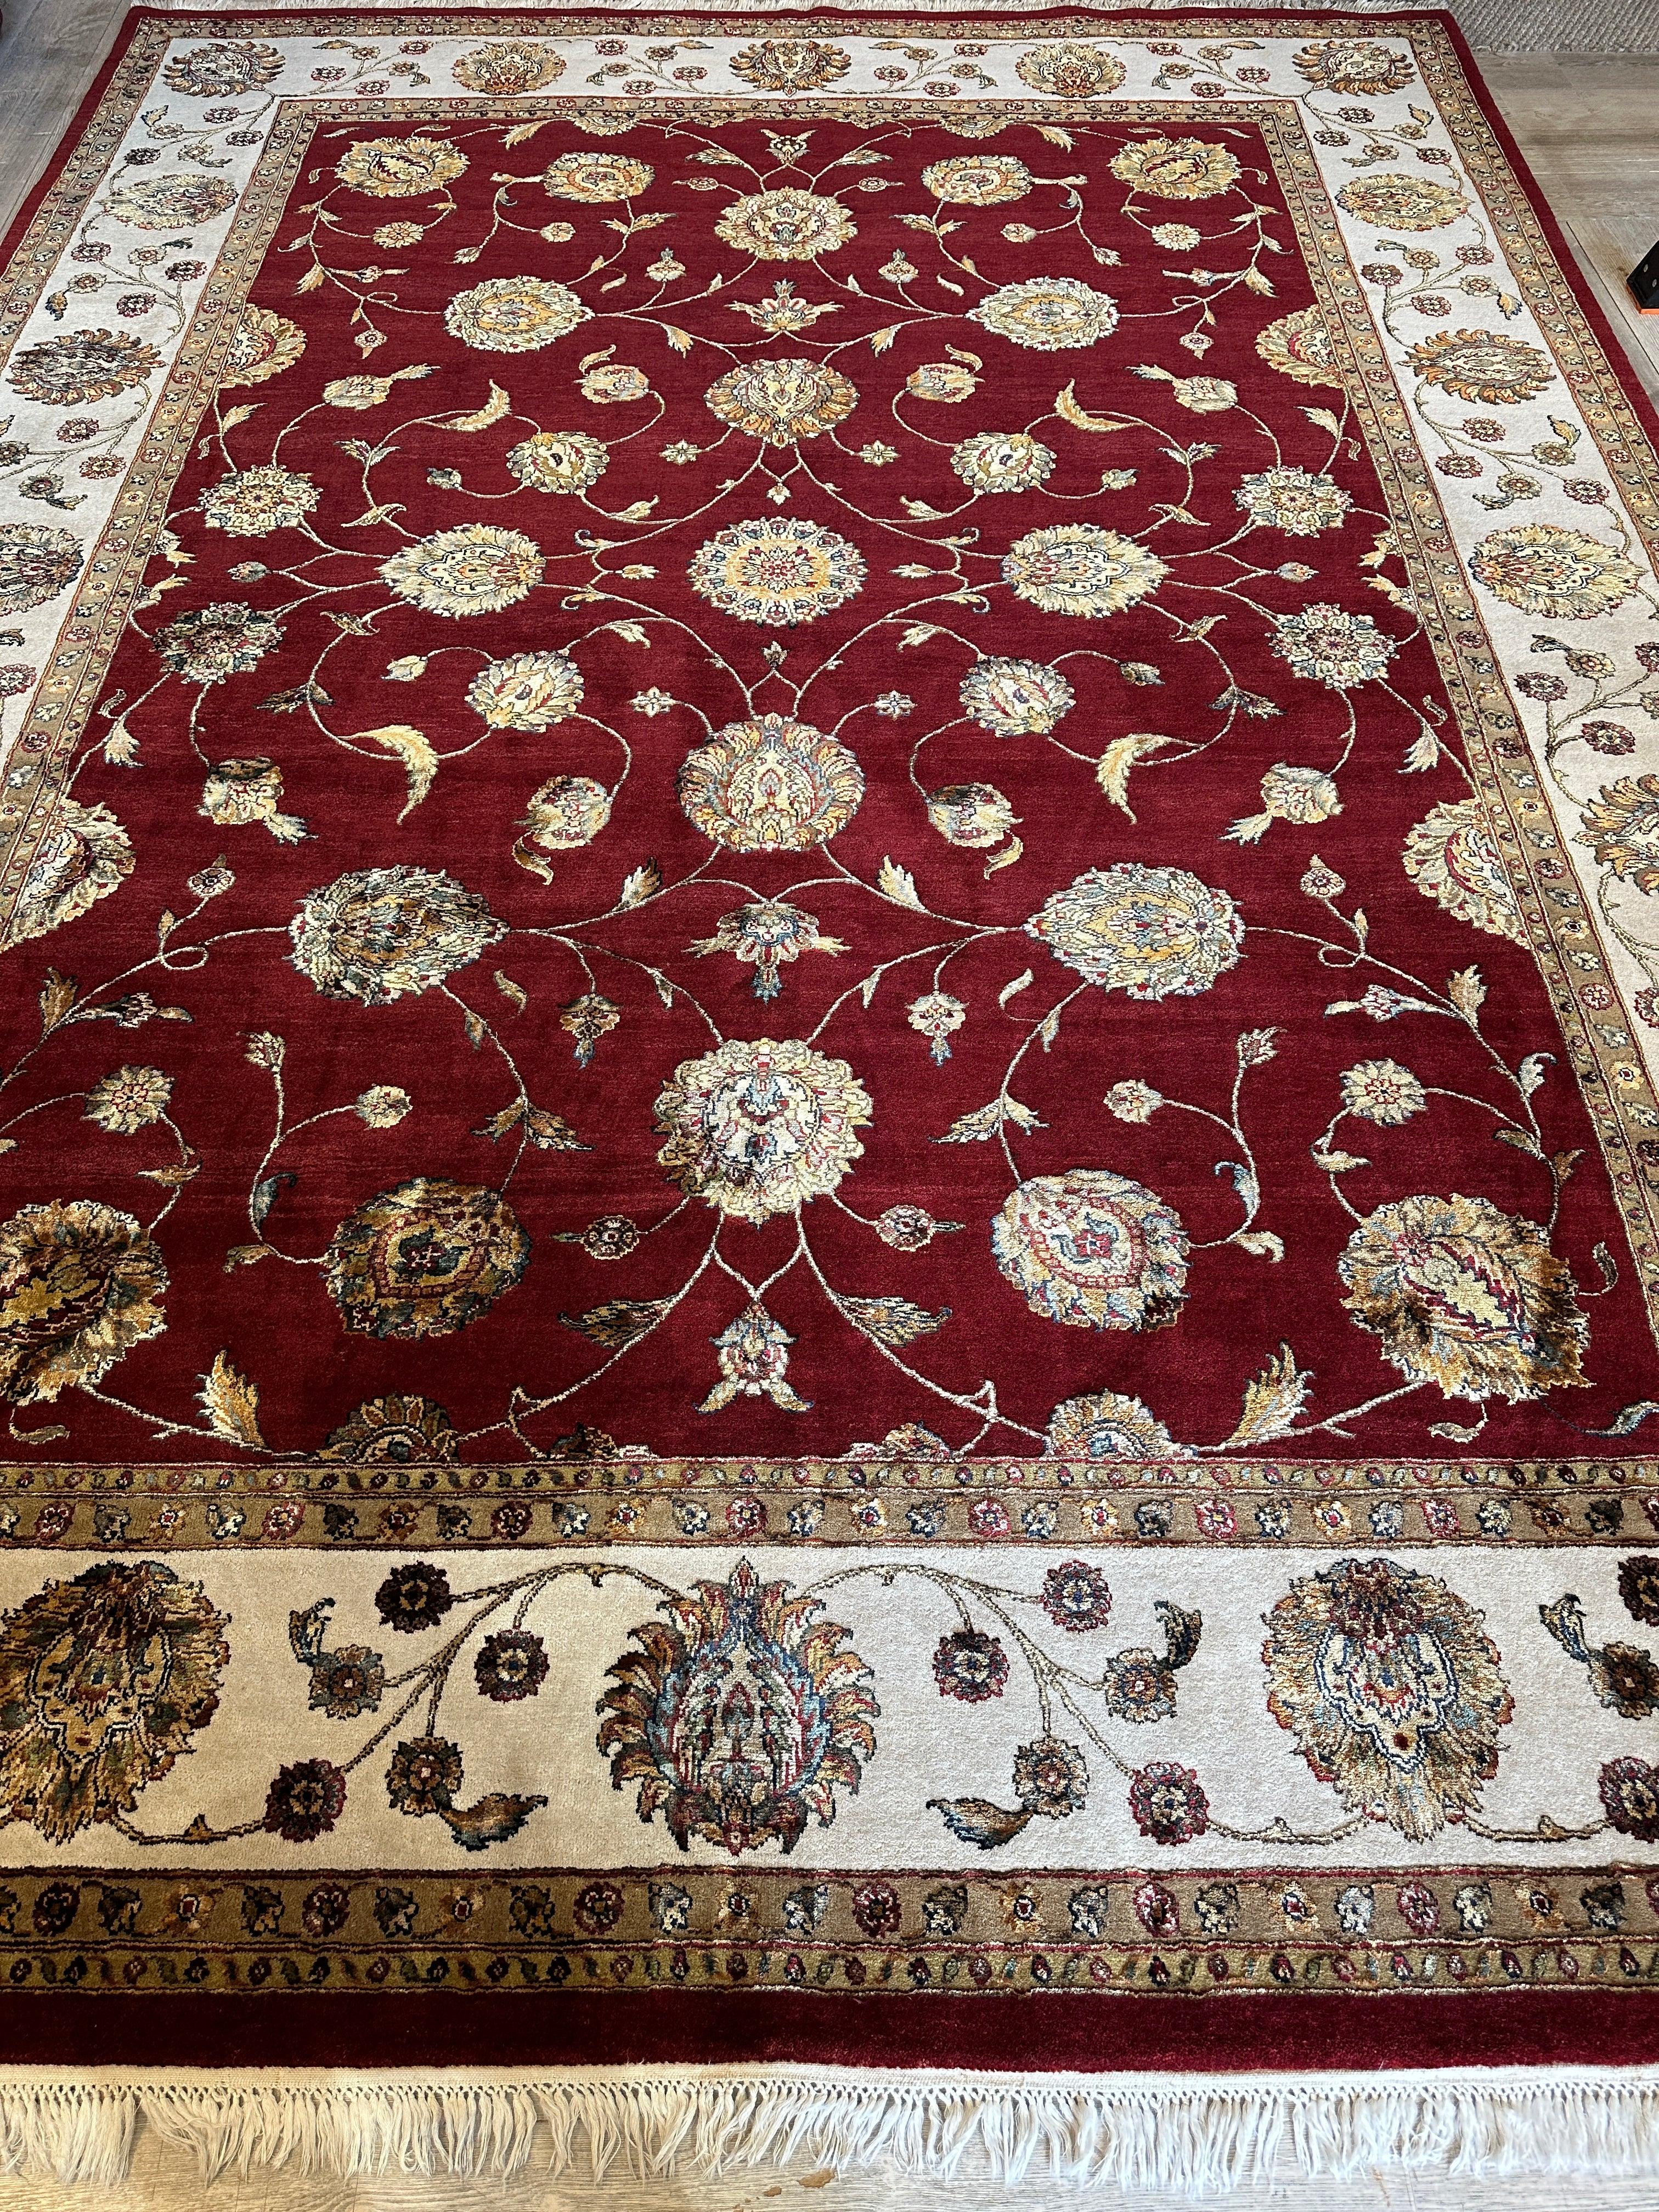 Fine Wool and Silk Agra Area Rug 12x9 Ft